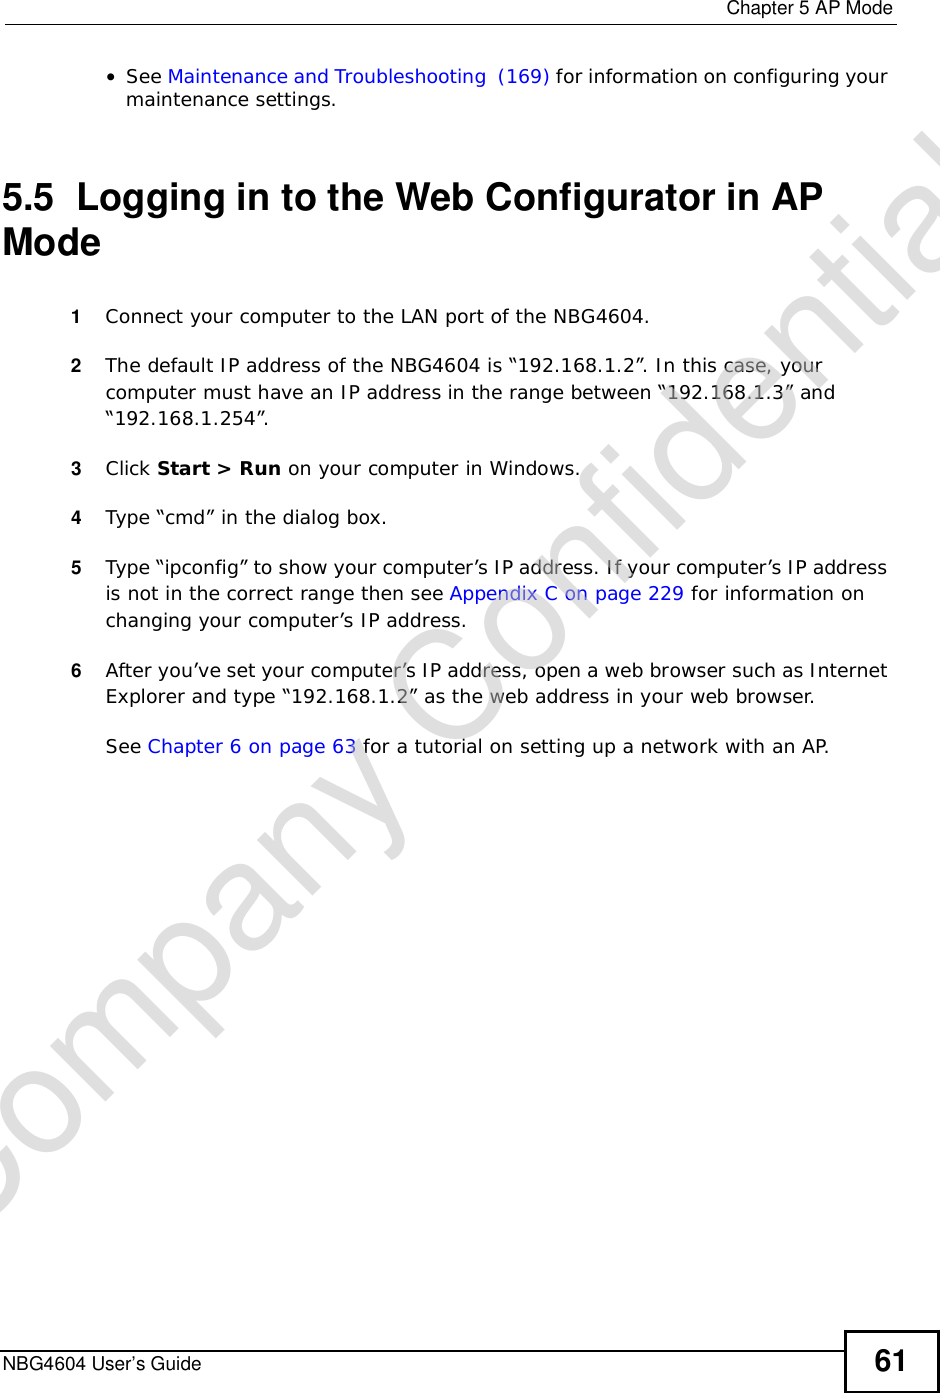  Chapter 5AP ModeNBG4604 User’s Guide 61•See Maintenance and Troubleshooting  (169) for information on configuring your maintenance settings. 5.5  Logging in to the Web Configurator in AP Mode1Connect your computer to the LAN port of the NBG4604. 2The default IP address of the NBG4604 is “192.168.1.2”. In this case, your computer must have an IP address in the range between “192.168.1.3” and “192.168.1.254”.3Click Start &gt; Run on your computer in Windows. 4Type “cmd” in the dialog box.5Type “ipconfig” to show your computer’s IP address. If your computer’s IP address is not in the correct range then see Appendix C on page 229 for information on changing your computer’s IP address.6After you’ve set your computer’s IP address, open a web browser such as Internet Explorer and type “192.168.1.2” as the web address in your web browser.See Chapter 6 on page 63 for a tutorial on setting up a network with an AP.Company Confidential